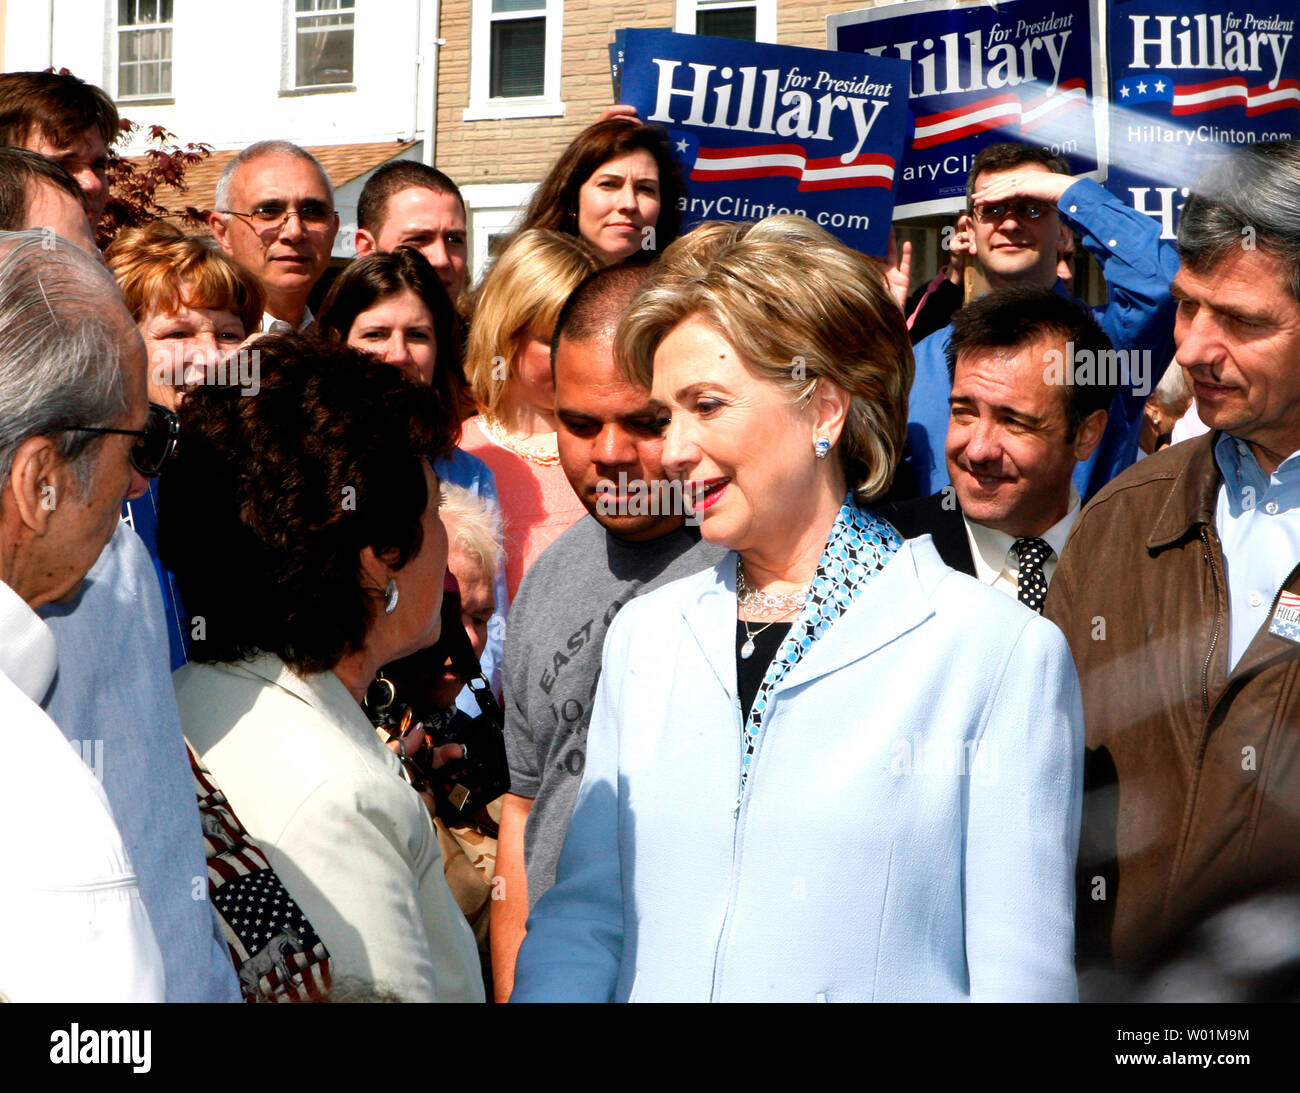 Democratic Presidential candidate Hillary Clinton talks with voters waiting to vote at a polling place in Conshohoken, Pennsylvania, on April 22, 2008. She was making some last minute campaign stops as voters went to the polls for the Pennsylvania Primary.    (UPI Photo/John Anderson) Stock Photo